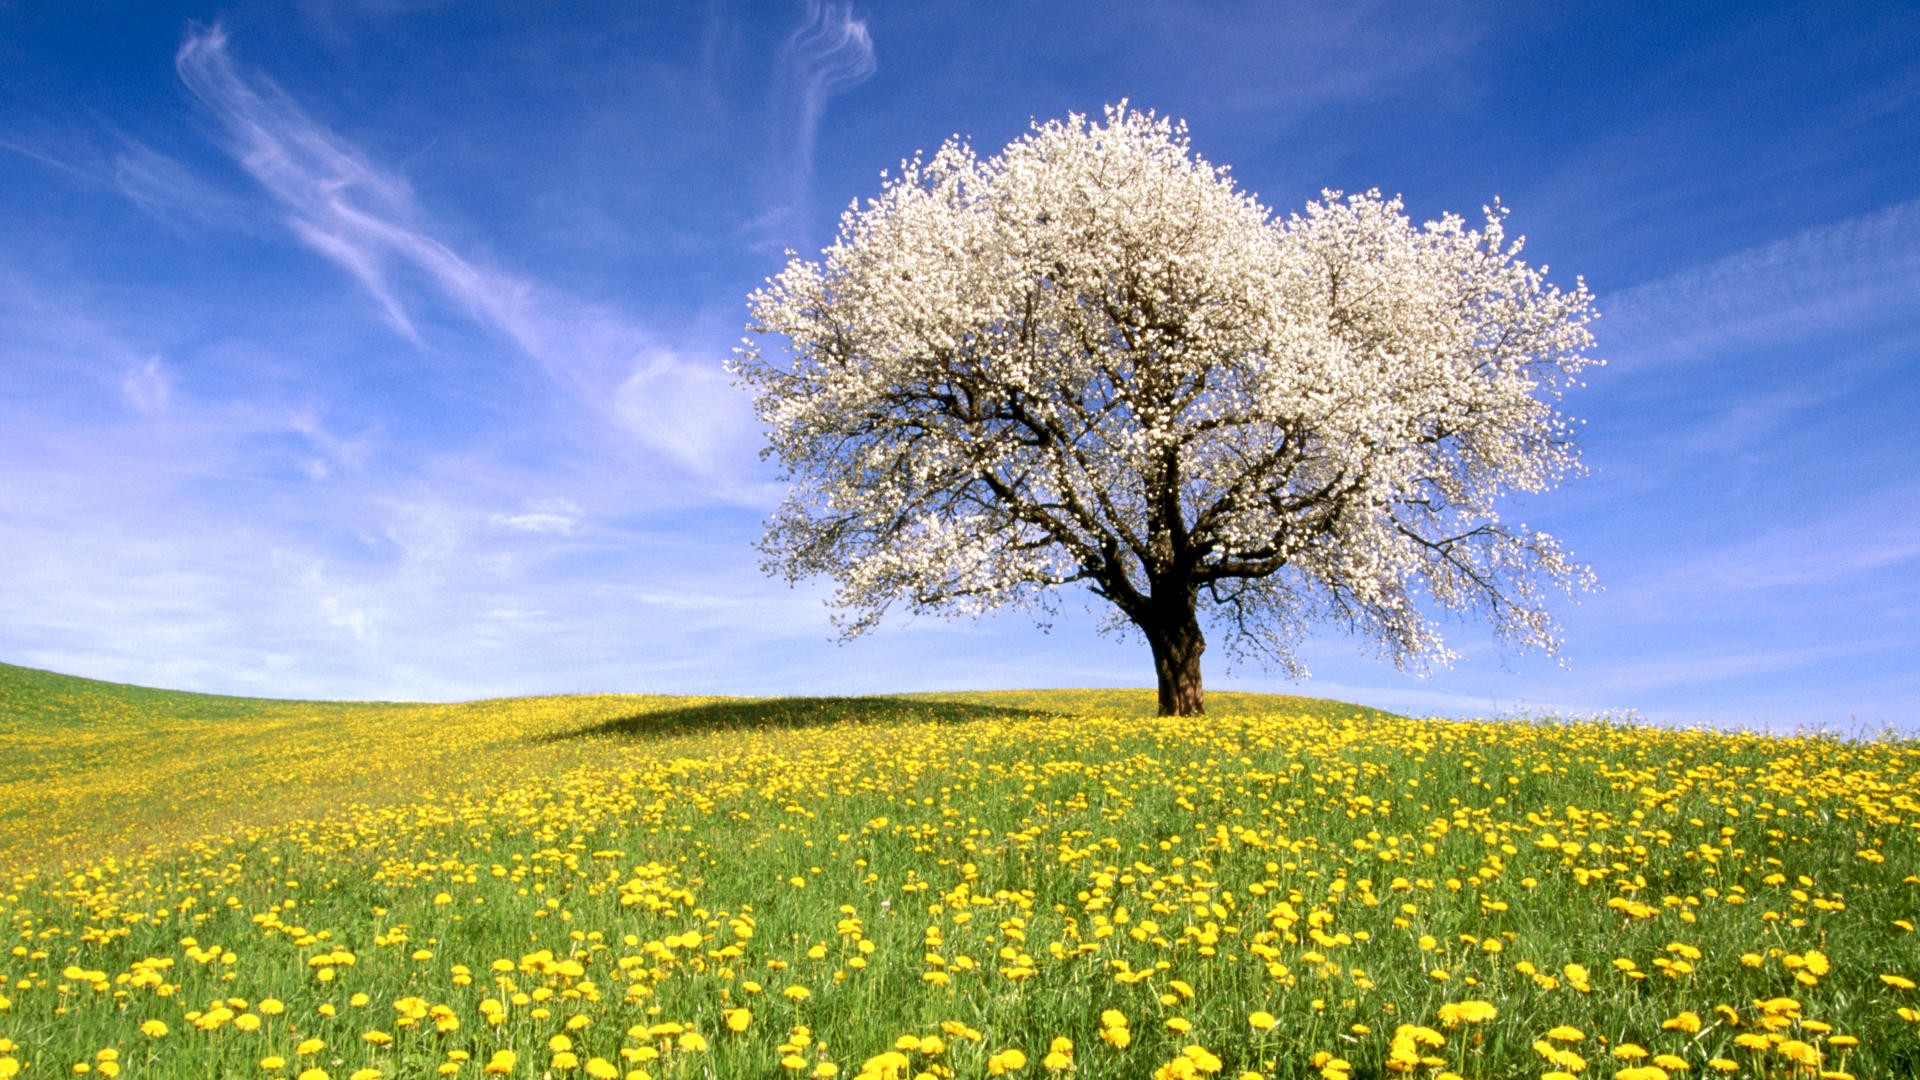 General 1920x1080 nature landscape trees flowers sky spring